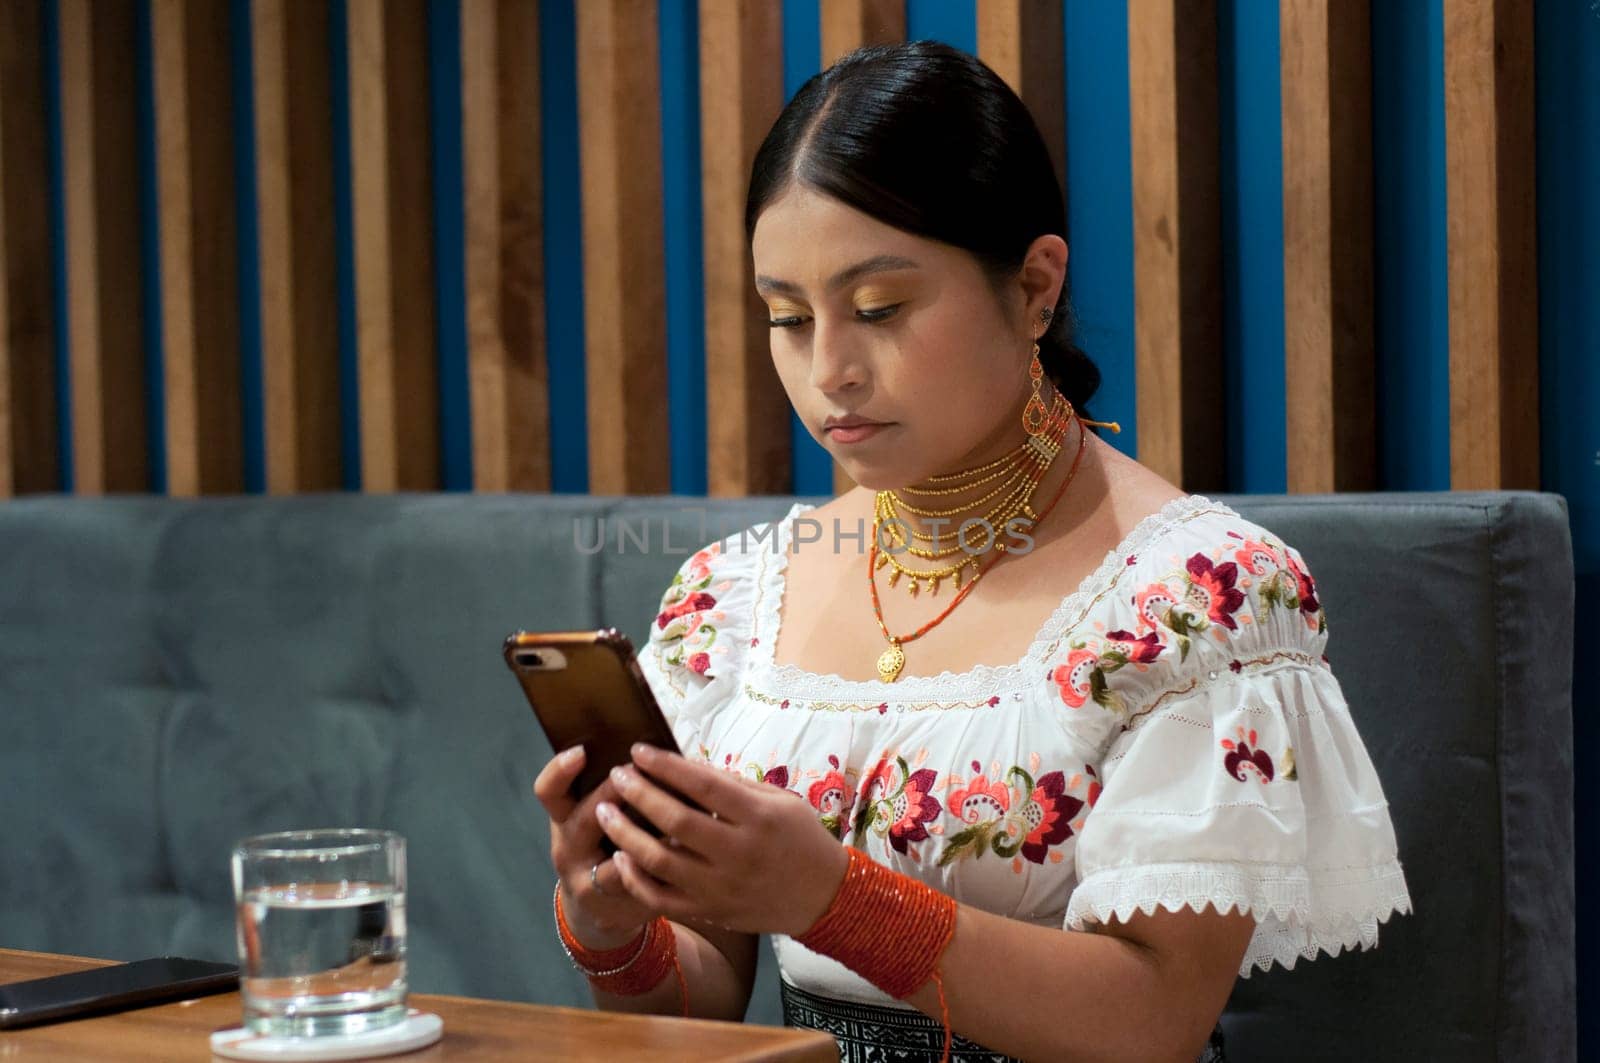 indigenous woman from otavalo, ecuador in traditional dress concentrating while writing a text message with her cell phone in a restaurant. High quality photo